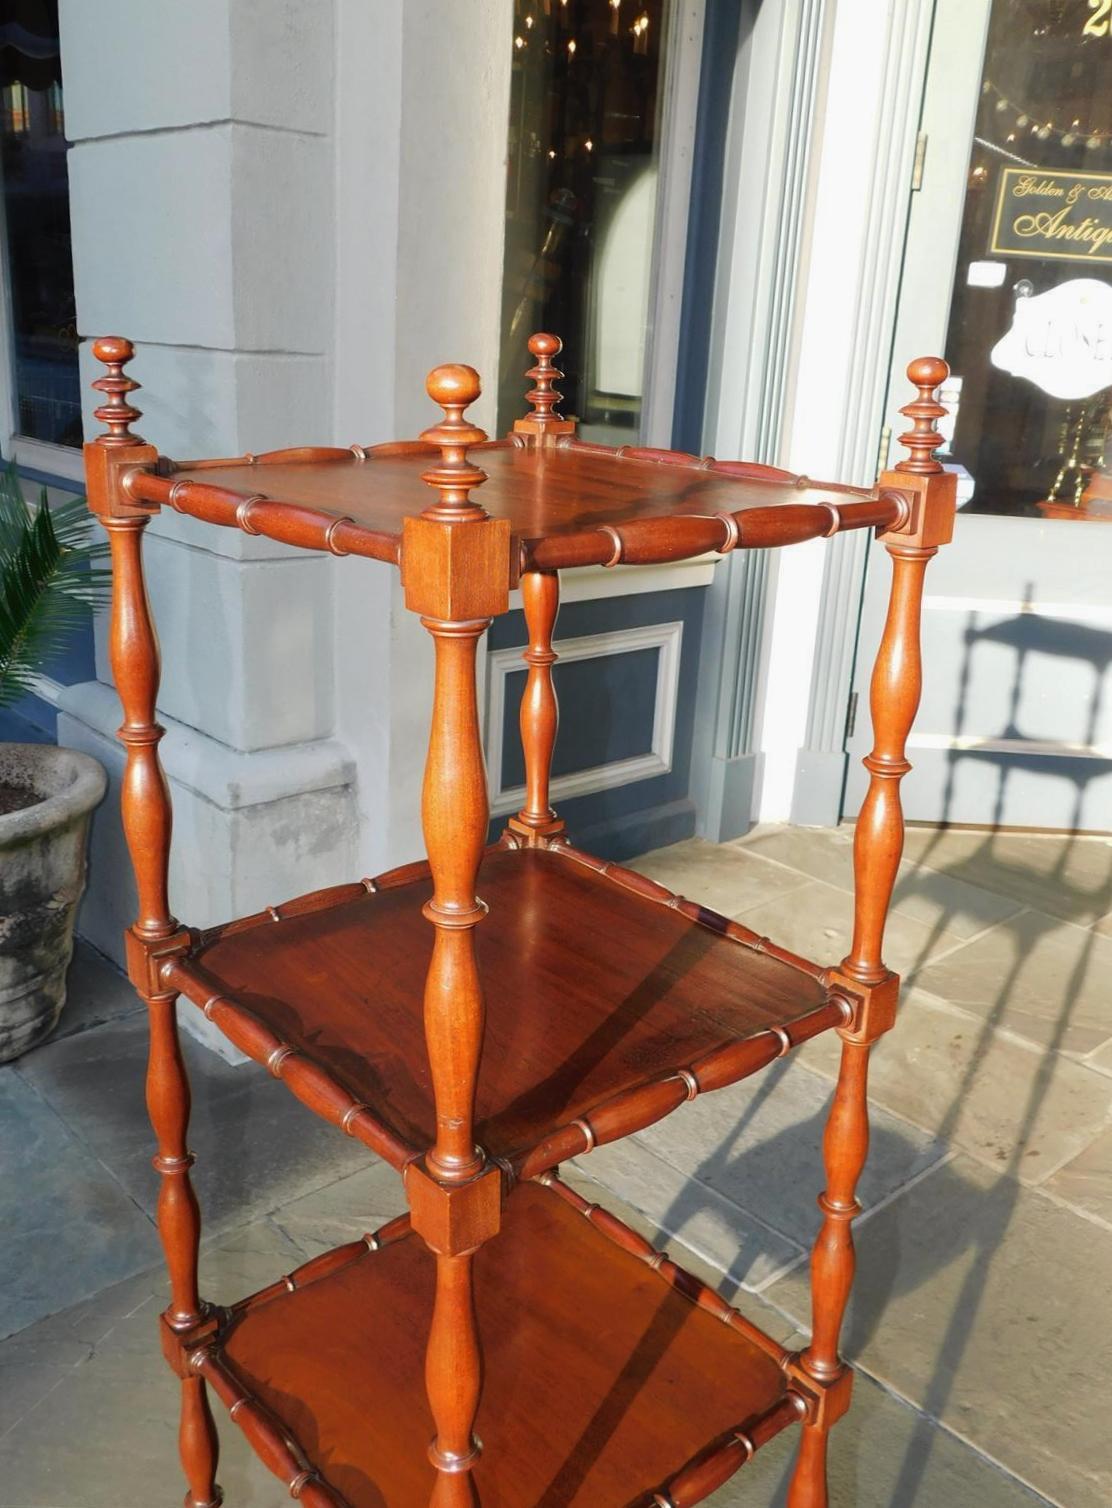 English Regency Mahogany Four Tiered Finial Etagere with Brass Casters, C. 1800 In Excellent Condition For Sale In Hollywood, SC